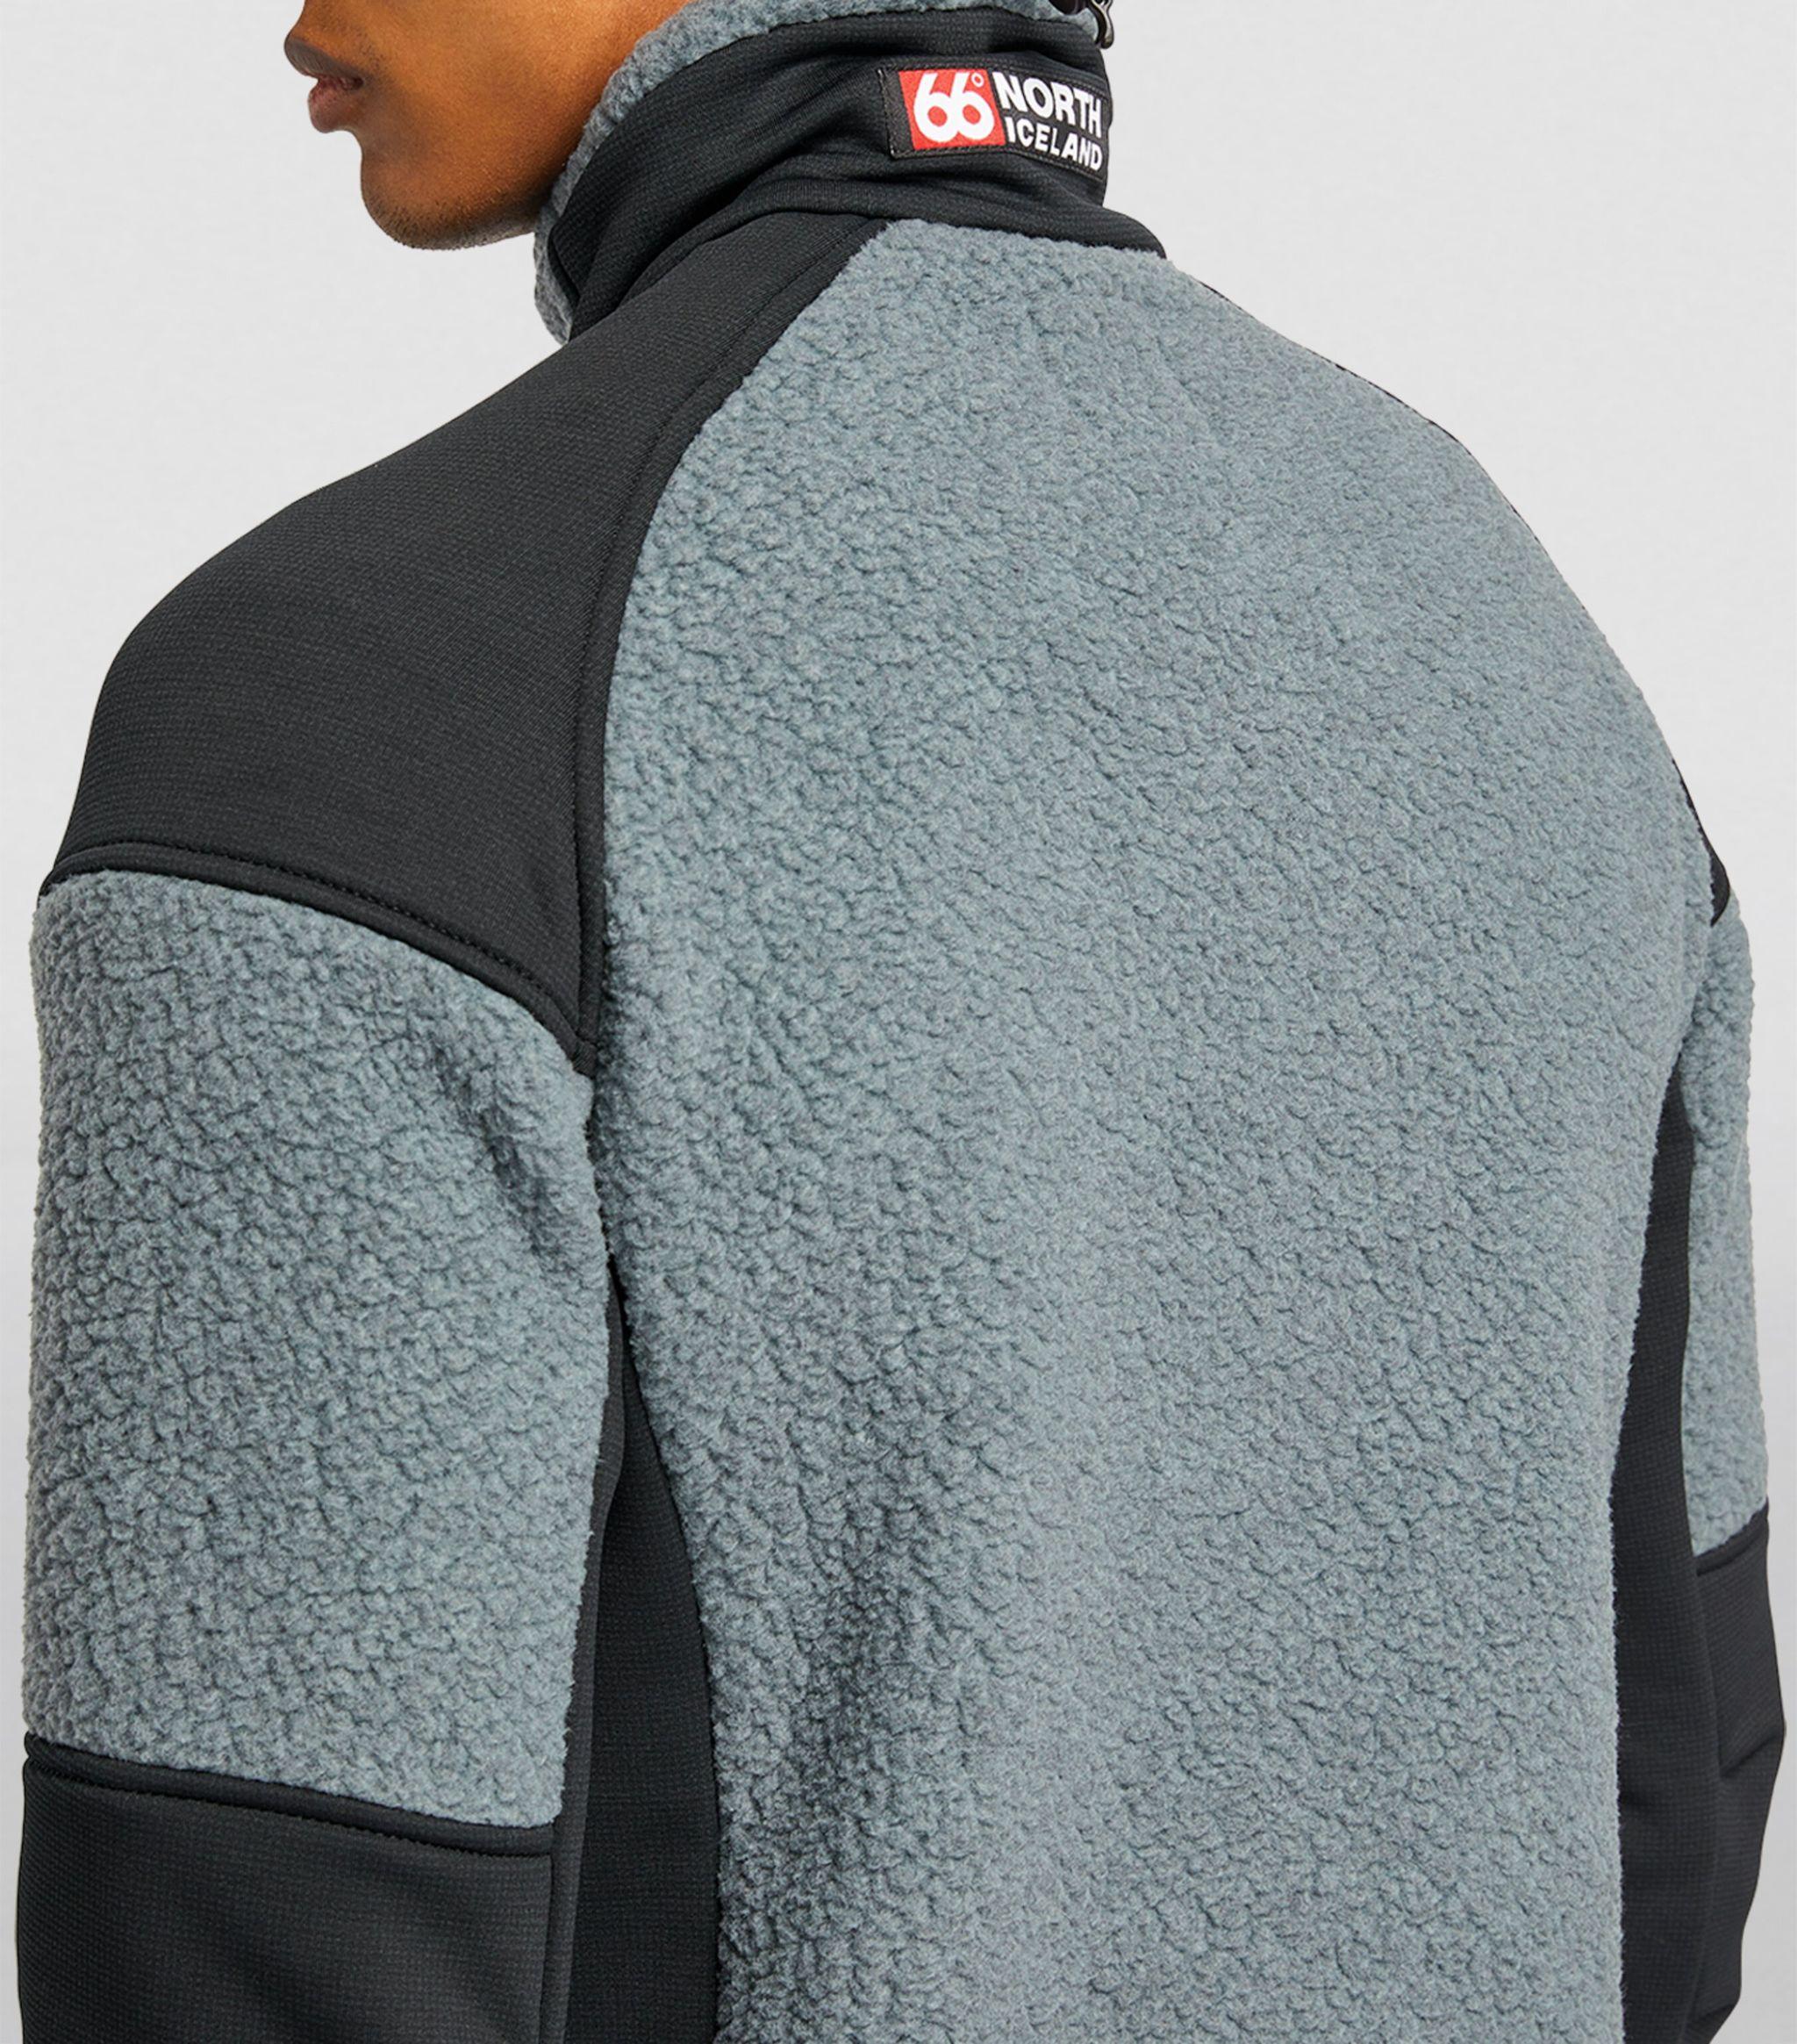 66 North Technical Shearling Tindur Fleece Jacket in Gray for Men